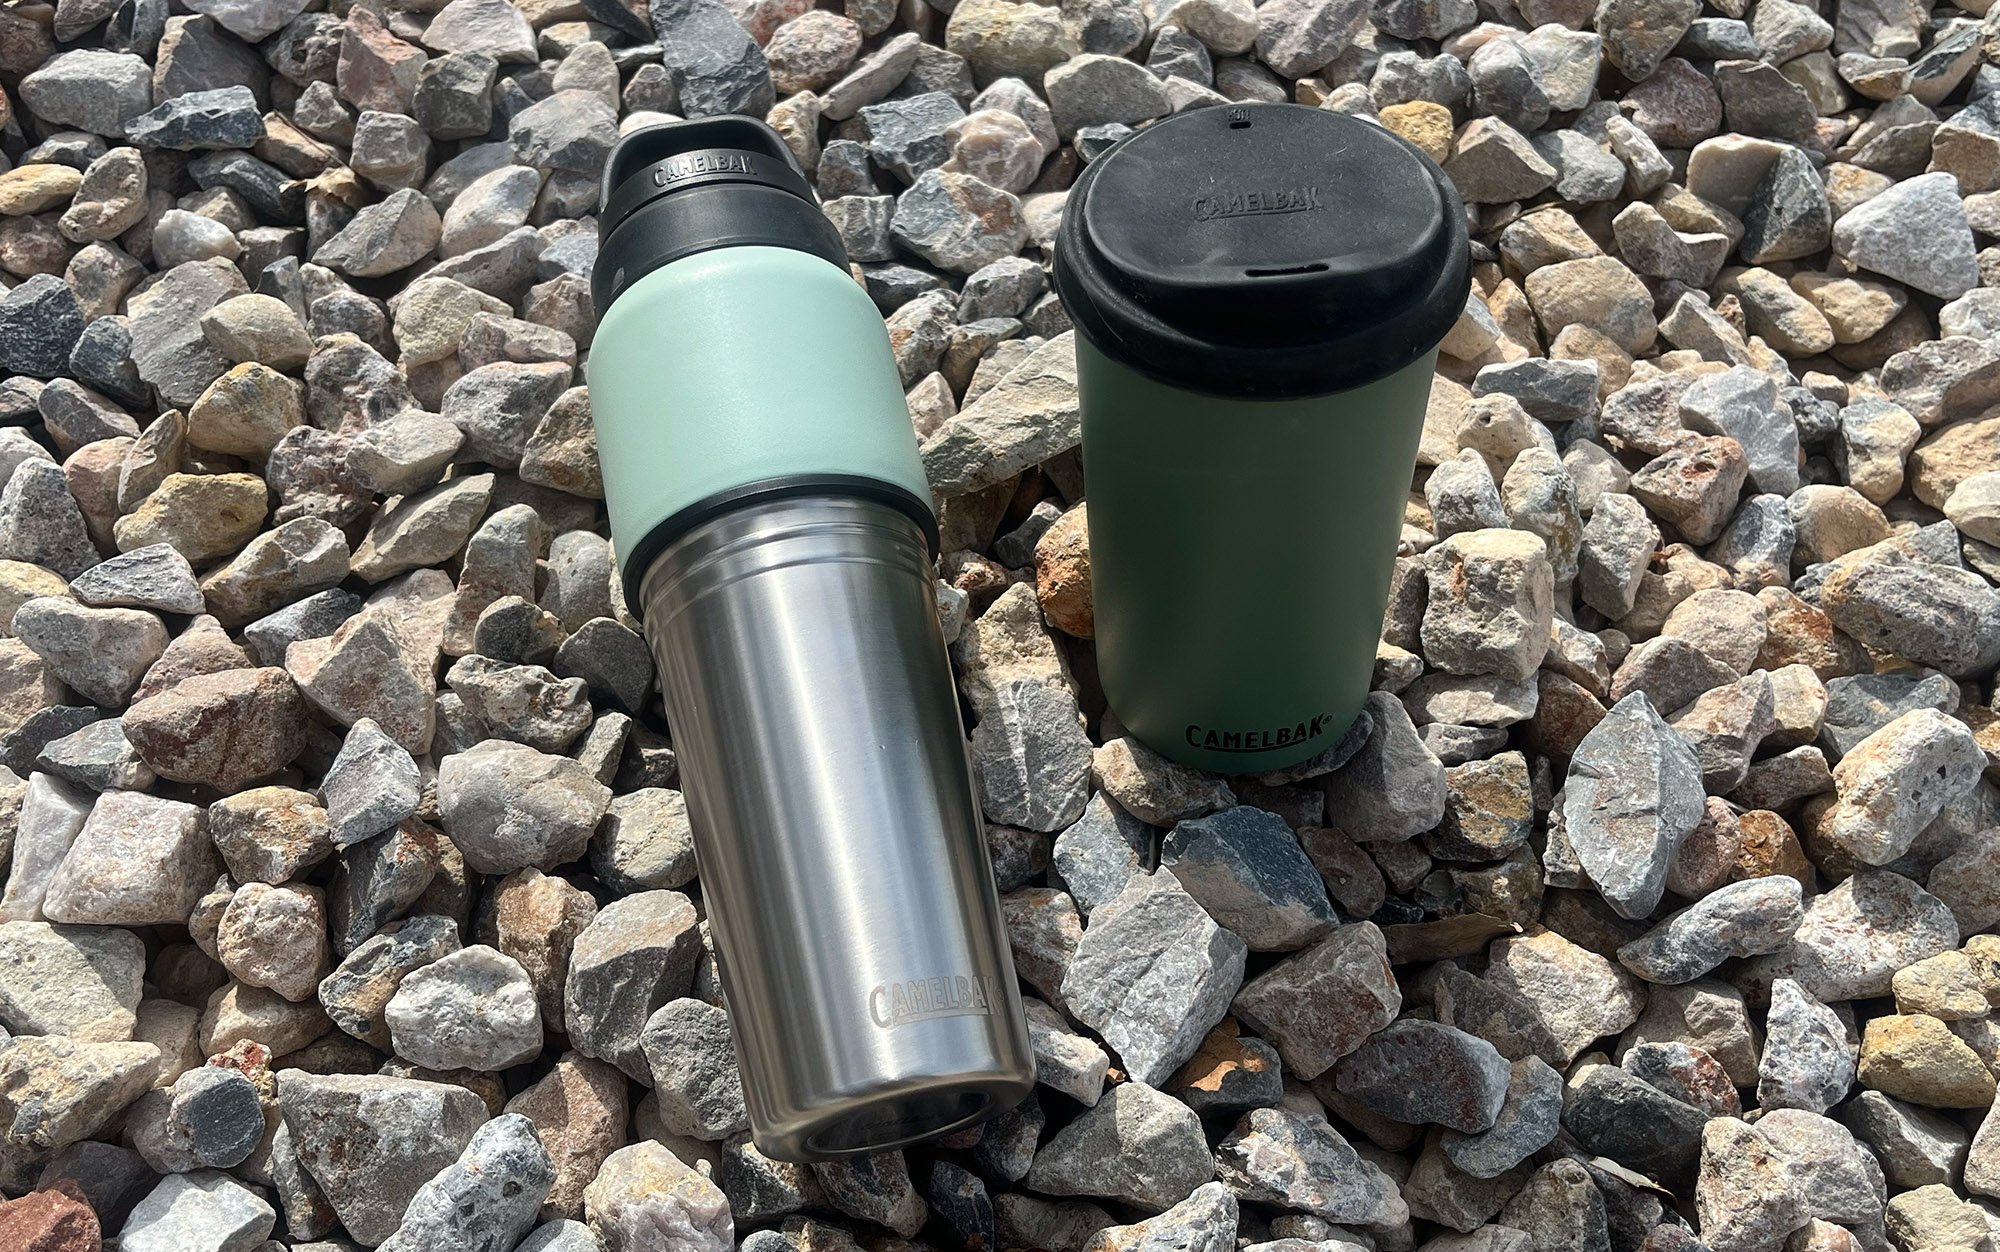 The Camelbak Multibev is a tumbler and water bottle in one.